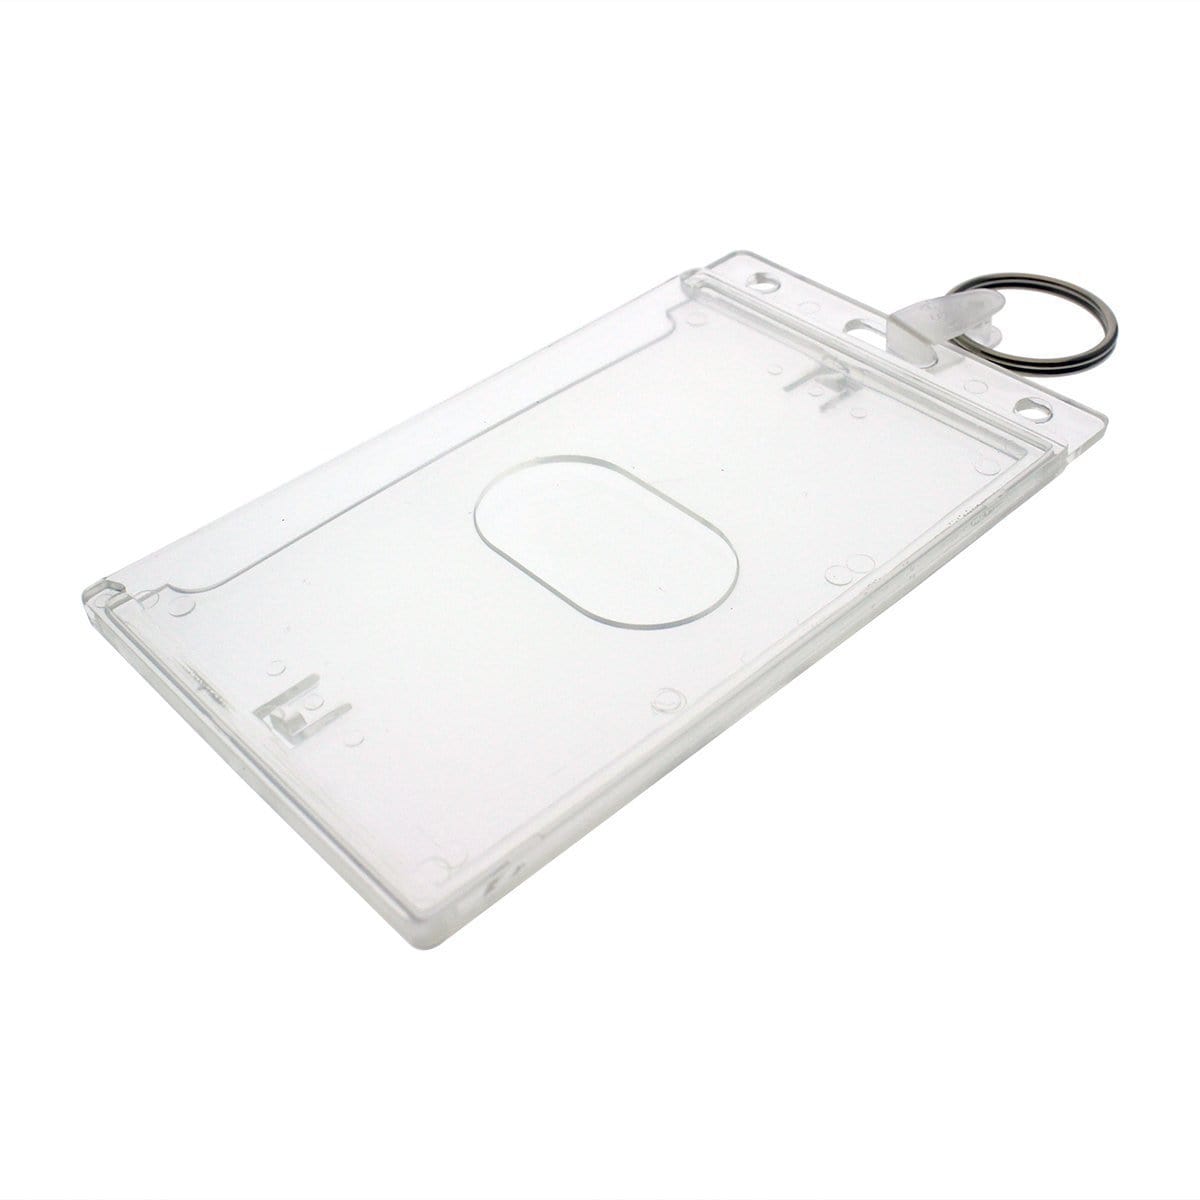 Rigid Card Holder with Slot and Key Ring, Credit Card Size